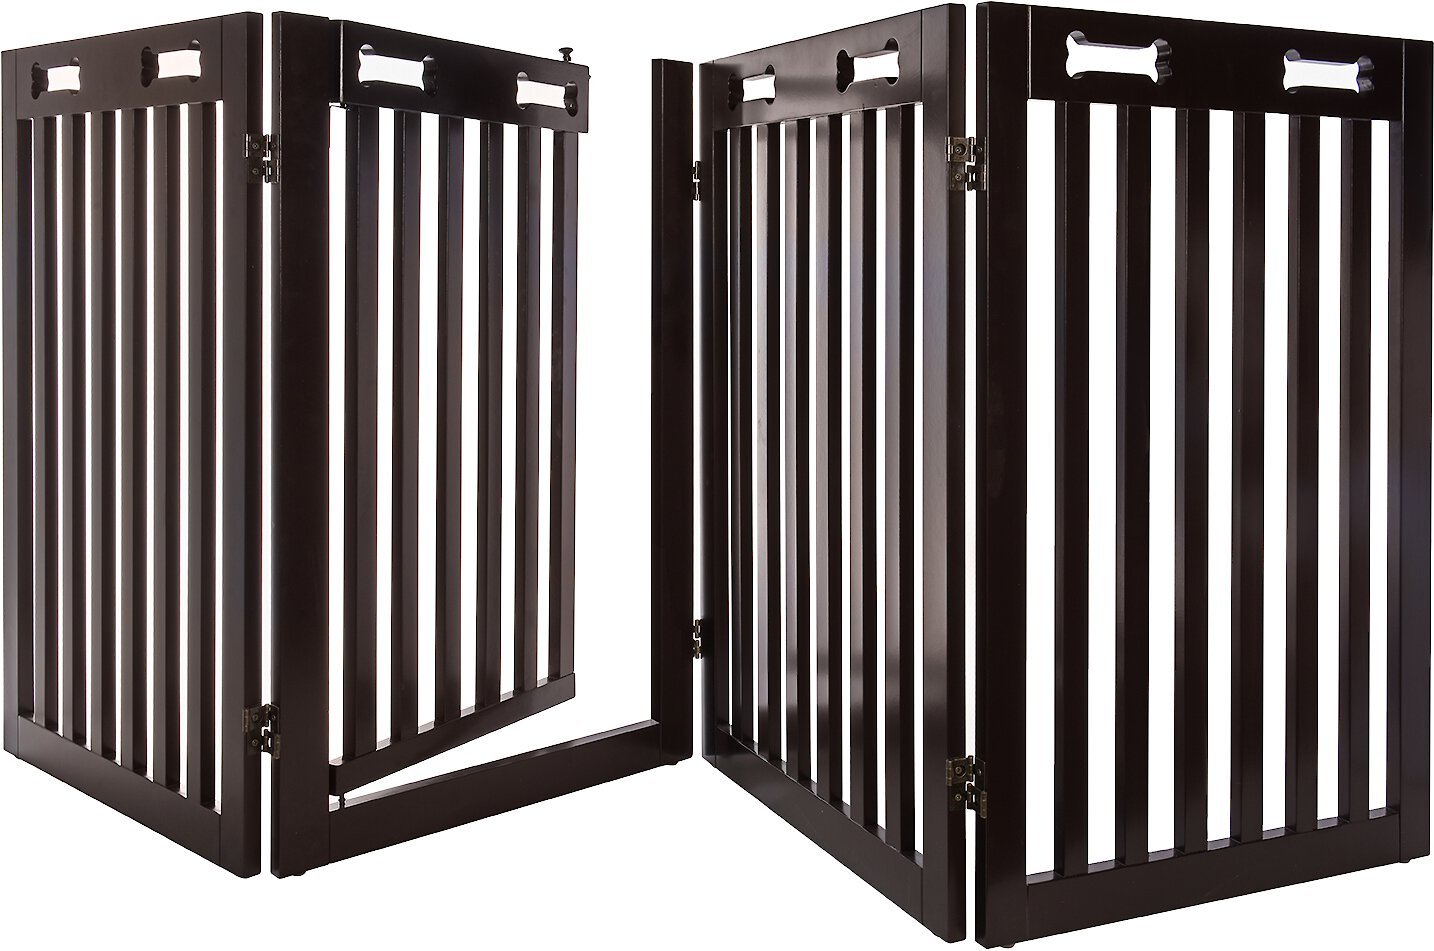 walk over pet gates for small dogs